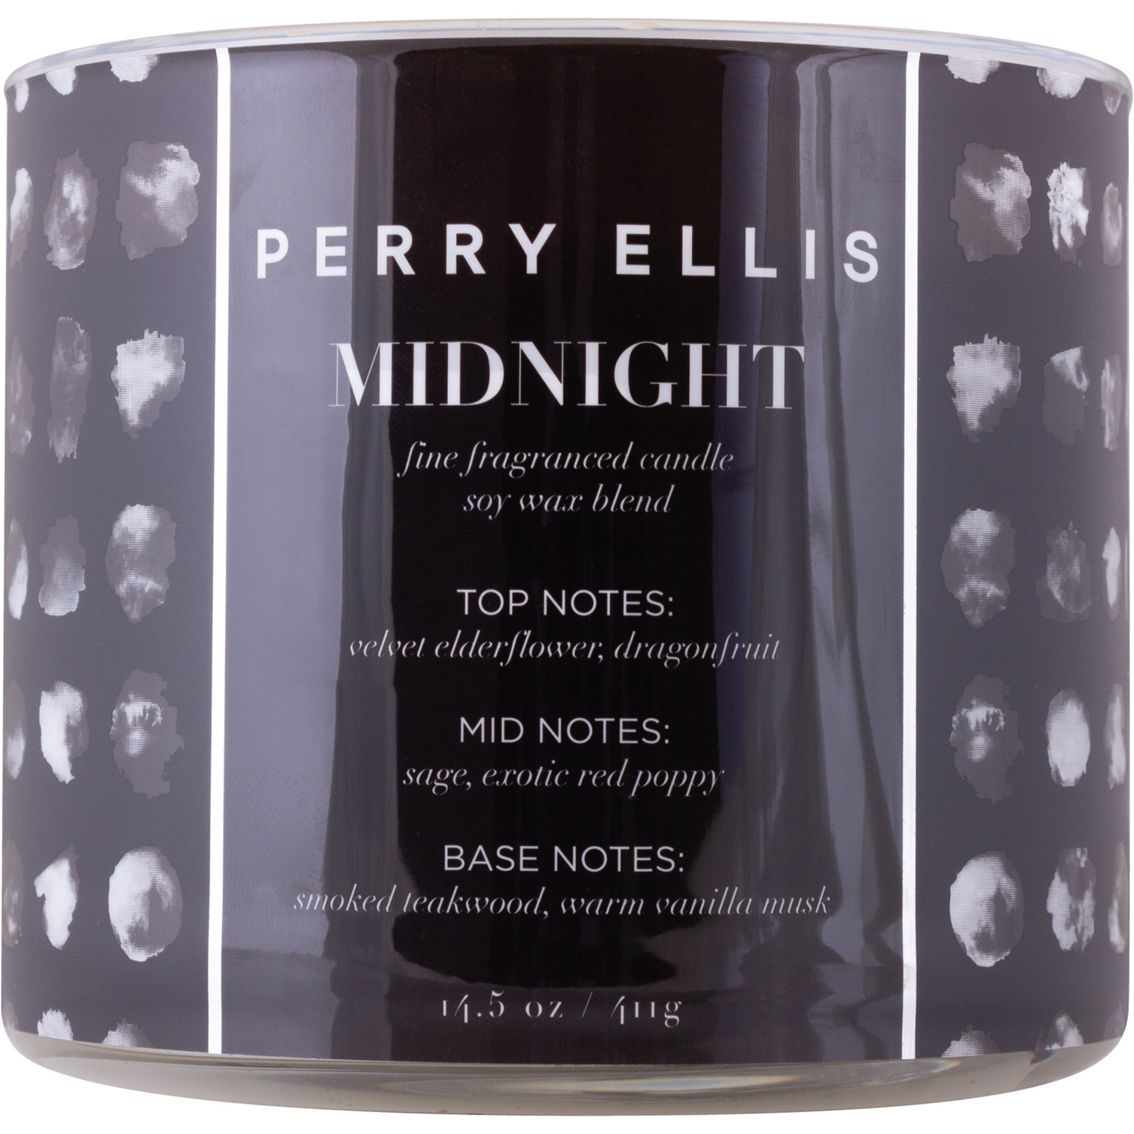 Perry Ellis Midnight Candle - Image 3 of 6